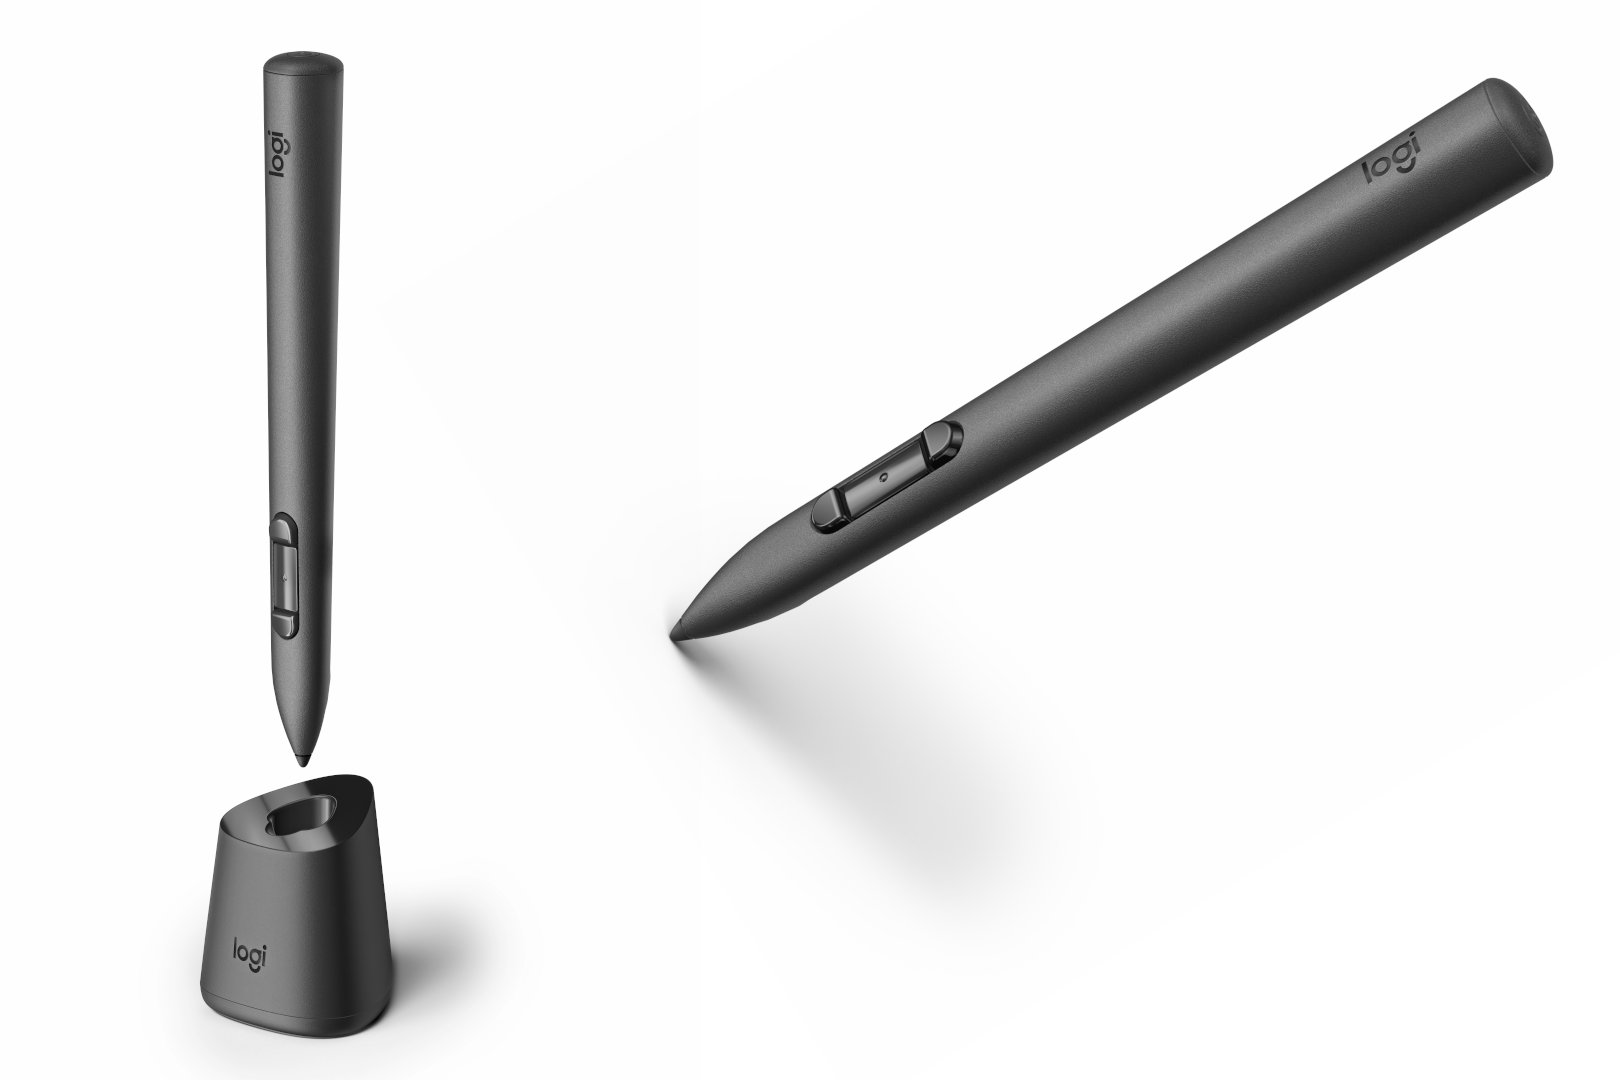 Logitech's MX Ink Stylus and MX Ink Well charging base appear on a white background.